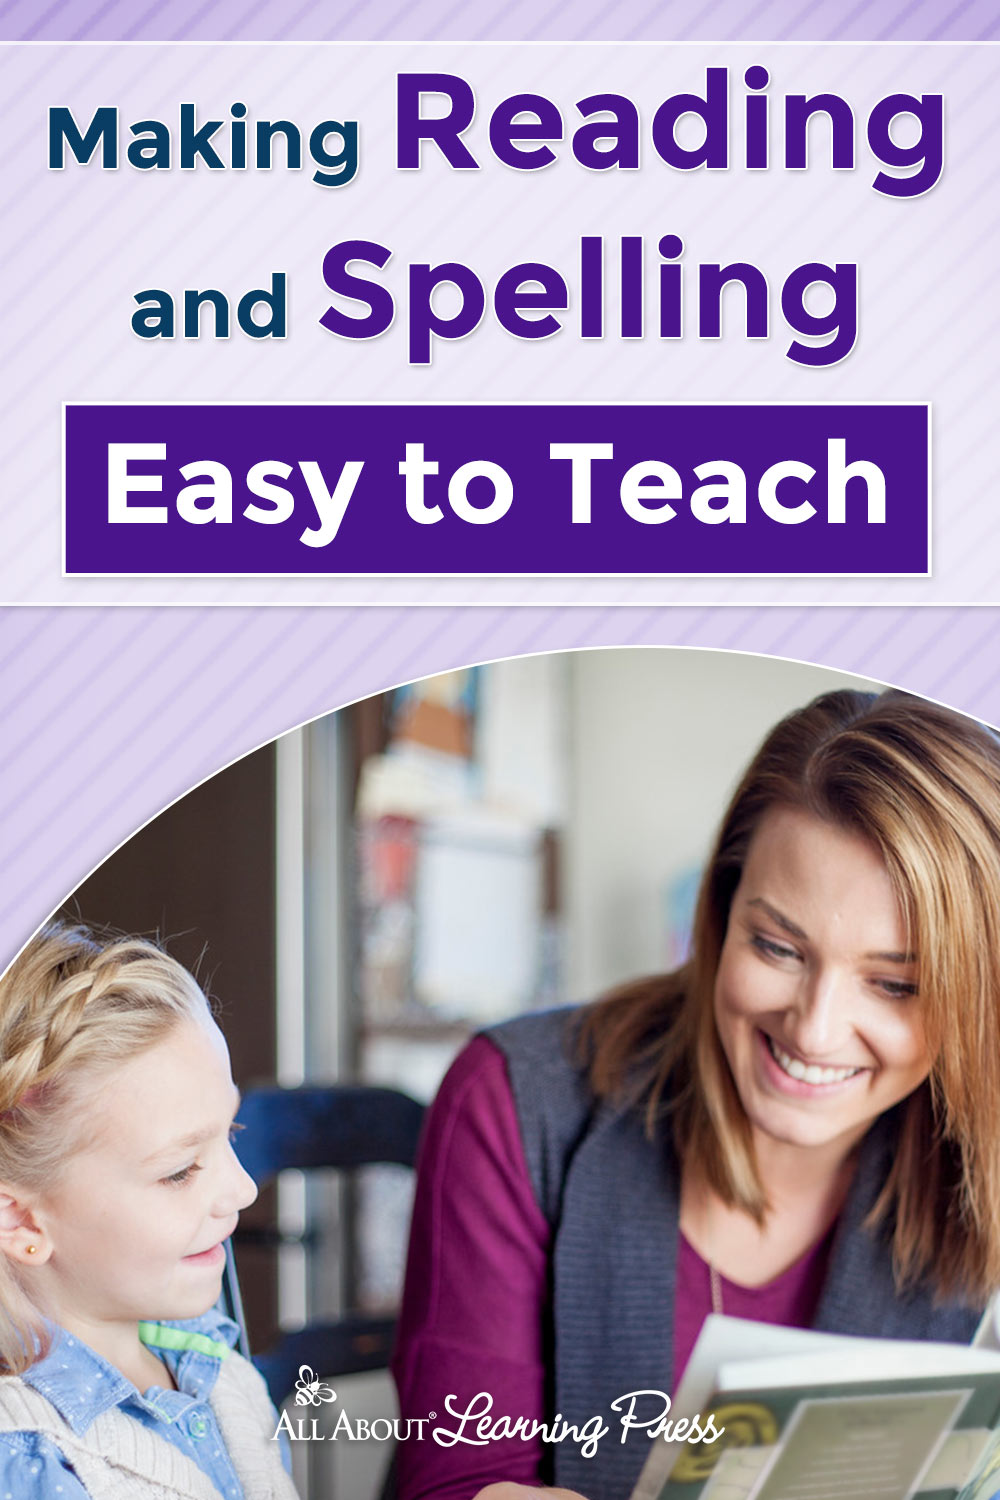 7 Ways We Make Reading and Spelling Easy to Teach